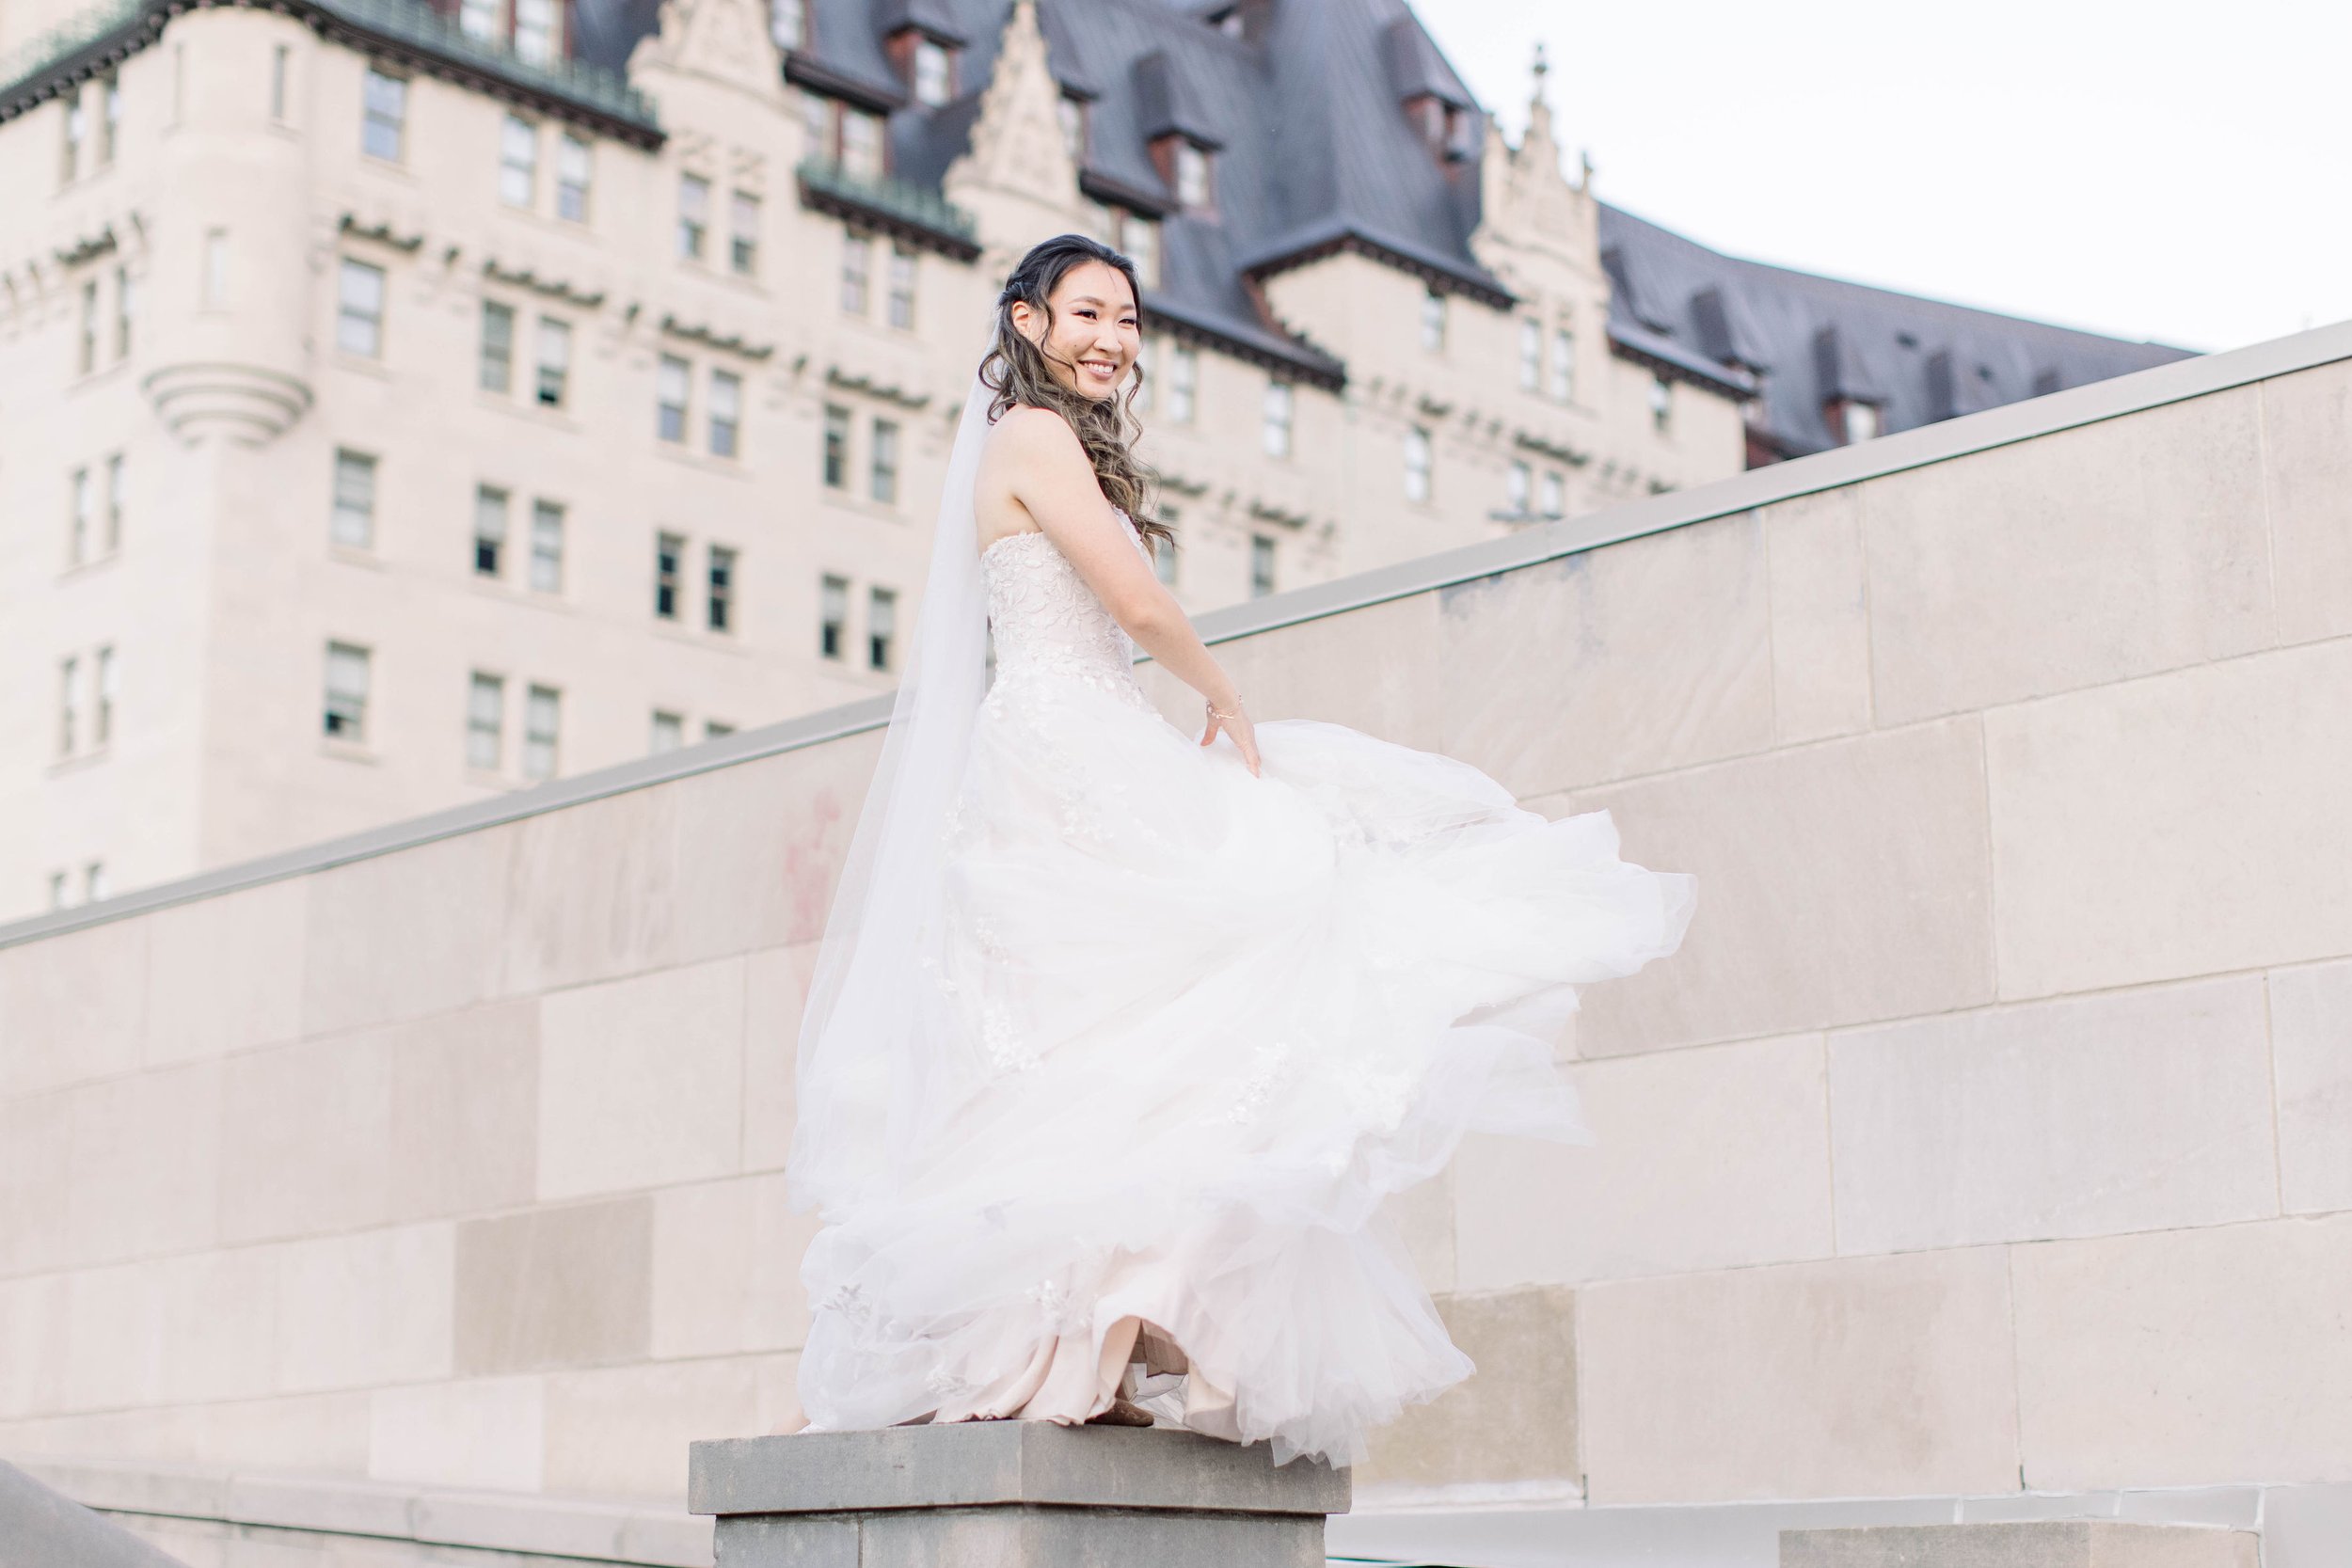  Chelsea Mason Photography captures a bride looking like a princess with a castle behind her. princess bridal portraits #ChelseaMasonPhotography #ChelseaMasonWeddings #DowntownOttawa #FairmontChateauLaurier #OttawaWeddings #OttawaPhotographers 